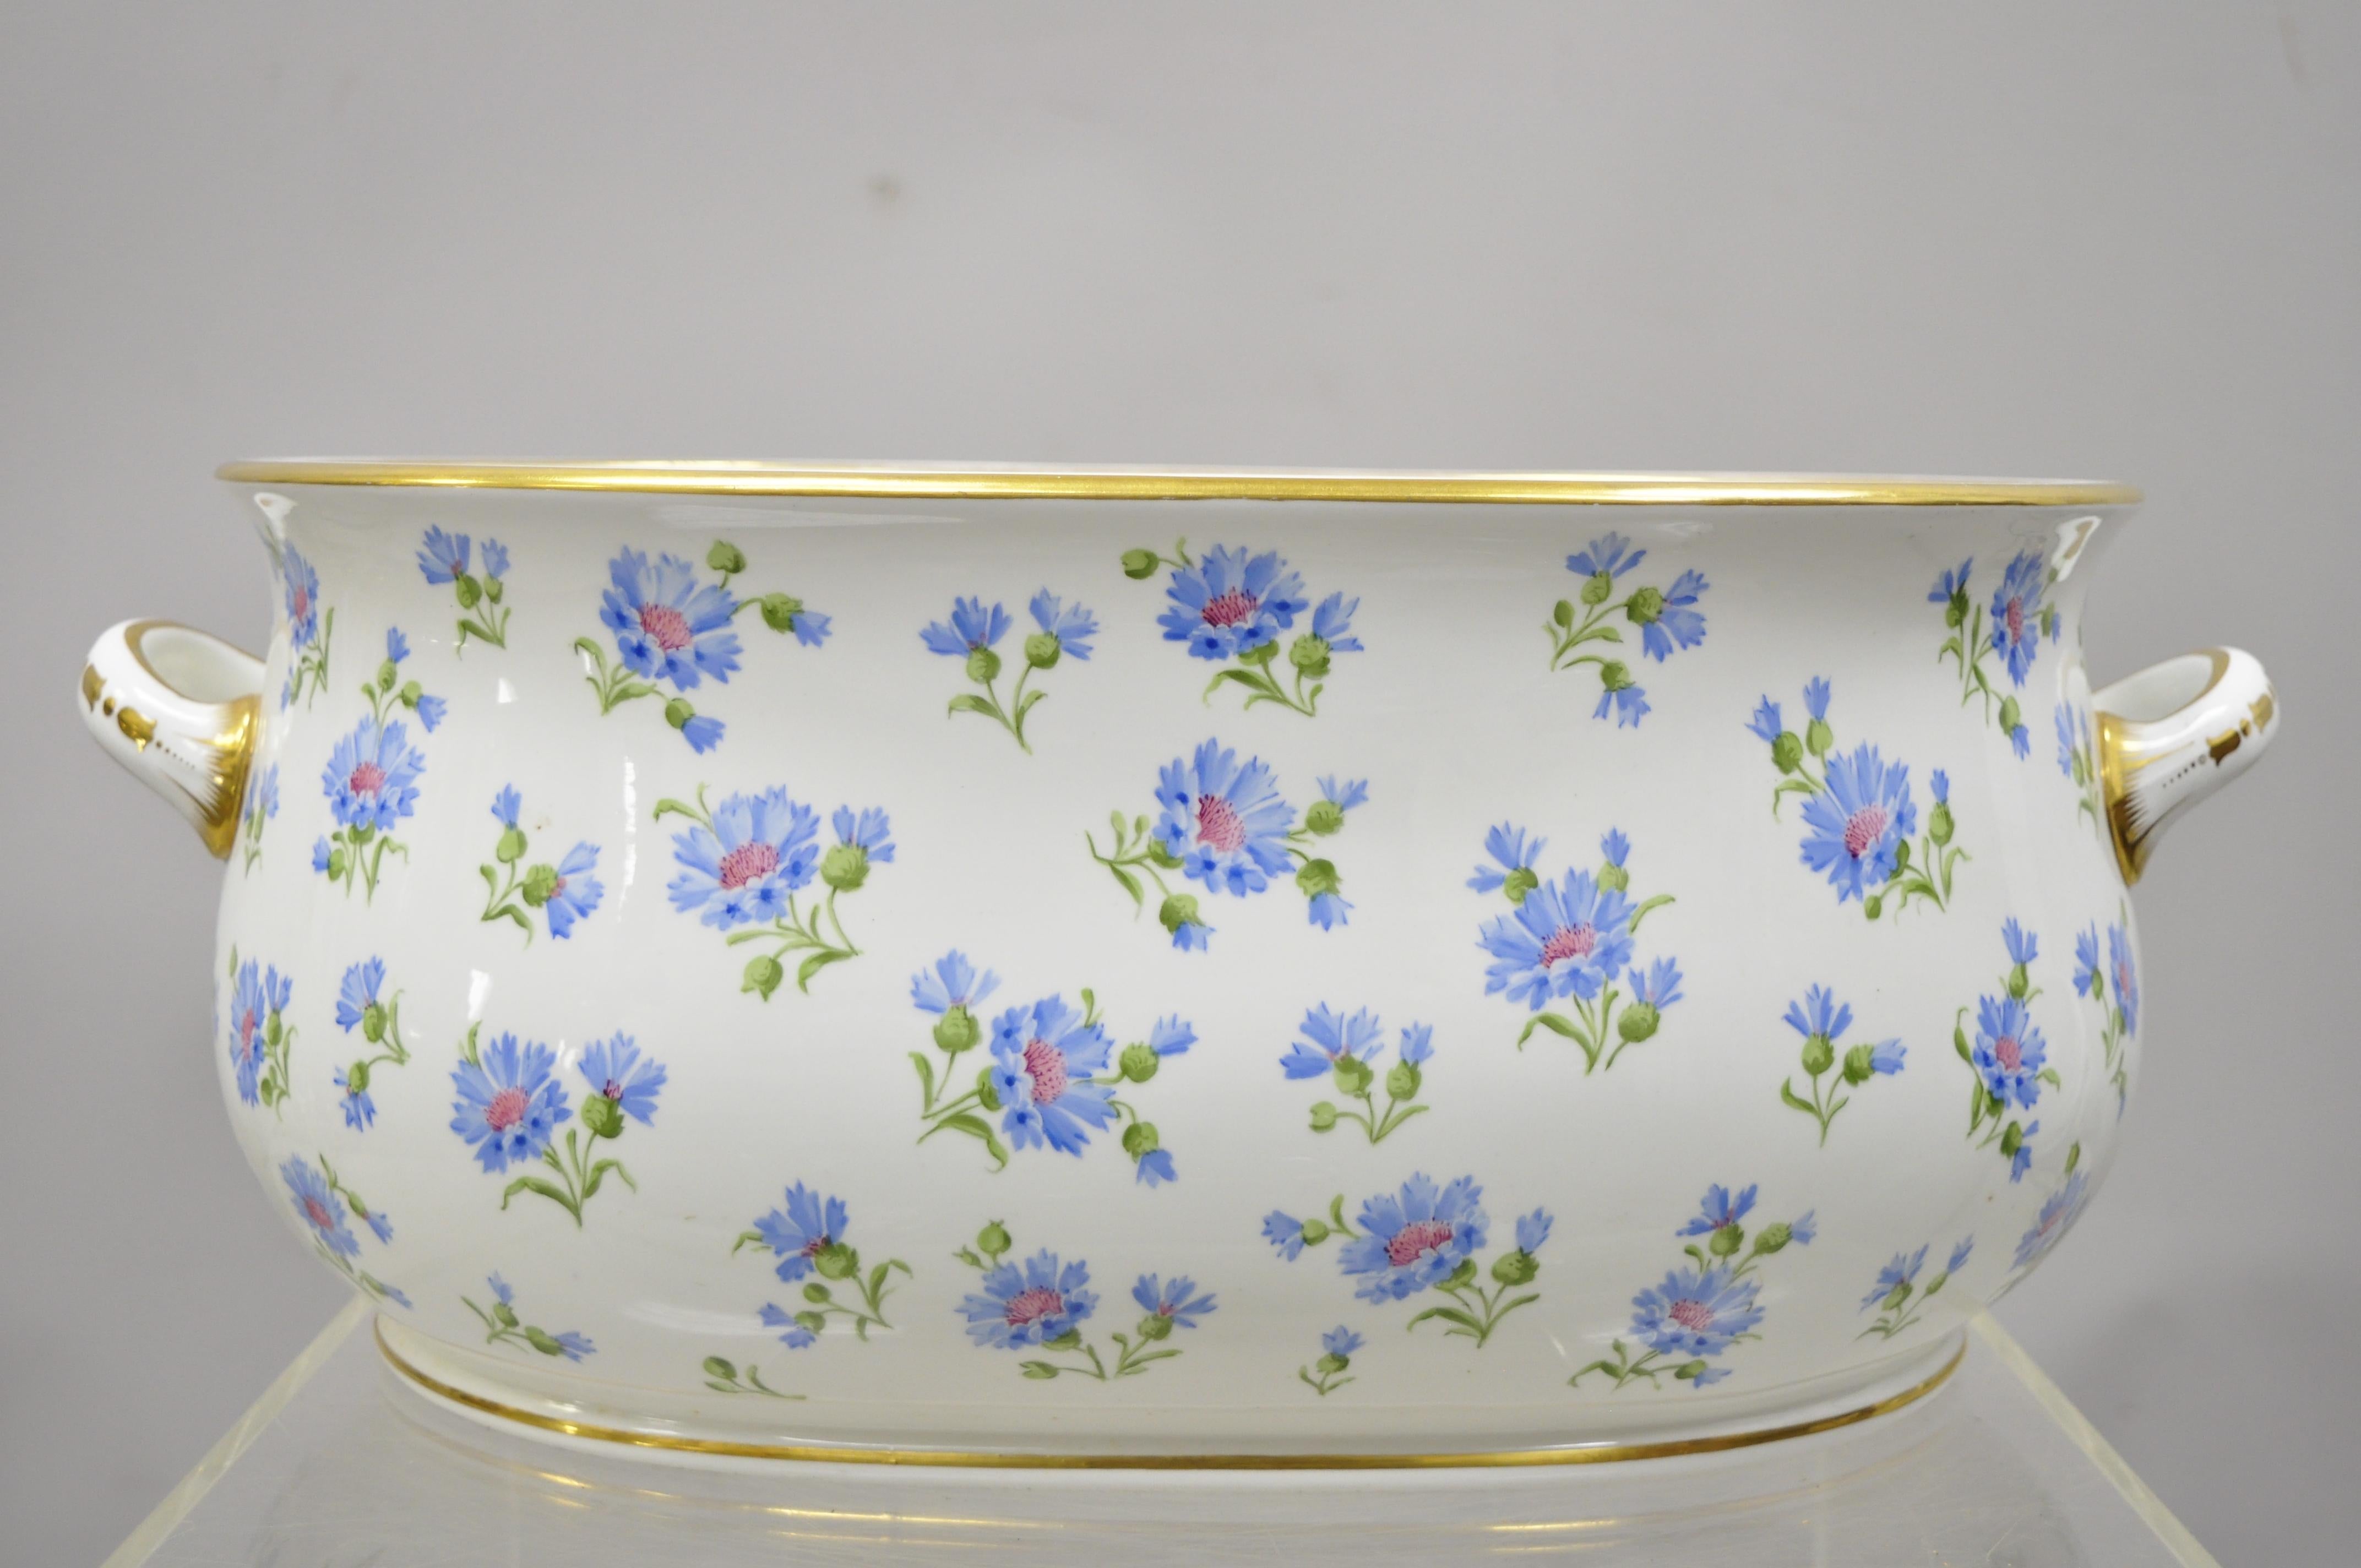 Antique English A.B. Daniell and Son blue flower porcelain foot bath basin. Item features a large impressive size, gold rim, hand painted blue flowers, ornately decorated handles, original stamp, very nice antique item, circa early 1900s.